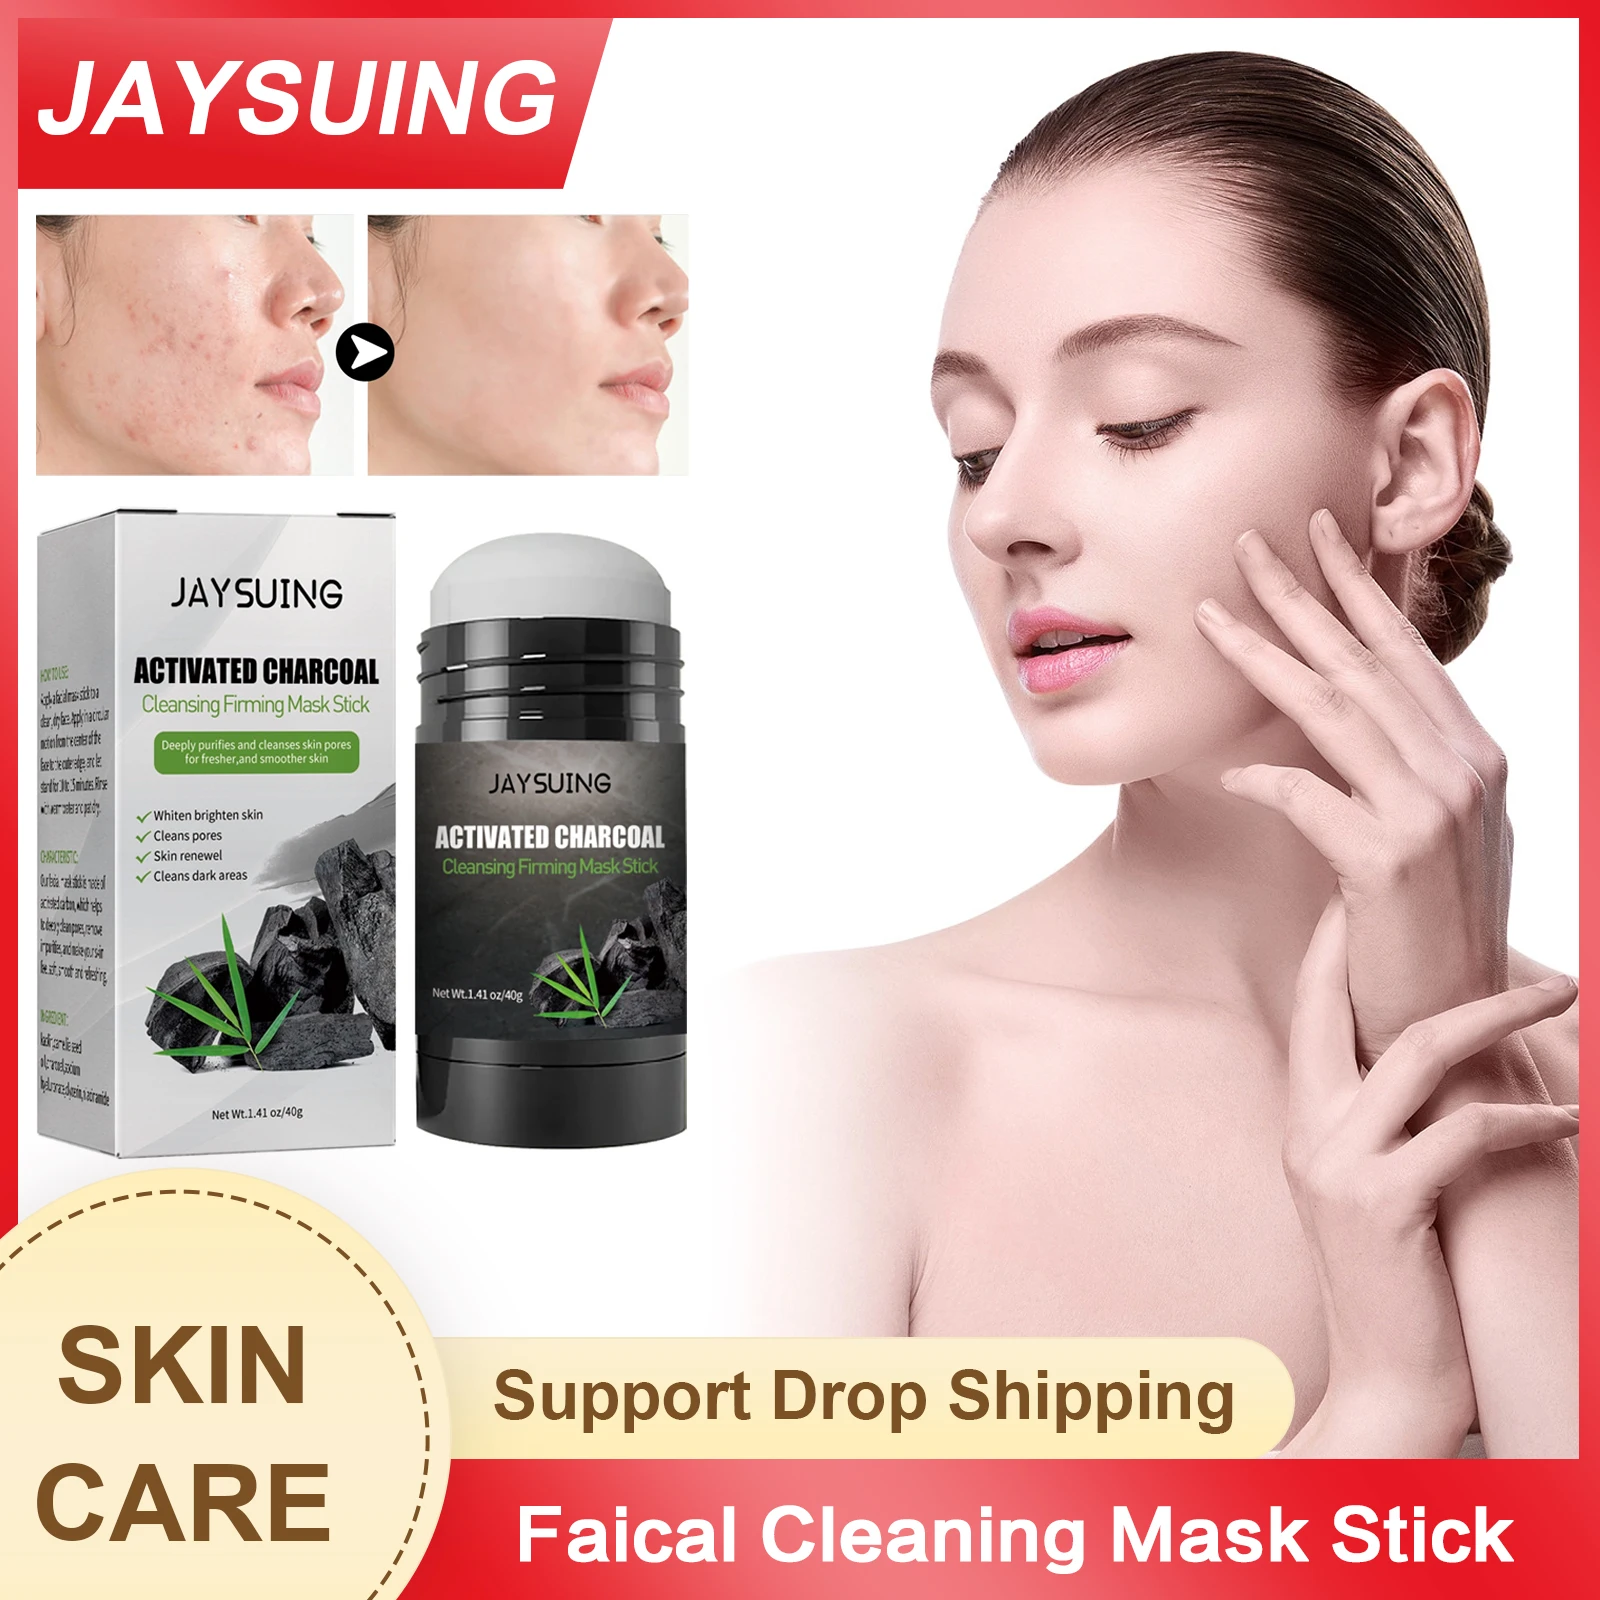 Anti Acne Mask Shrink Pores Blackheads Pimple Remover Oil Control Black Dots Spots Treatment Whitening Purifying Face Clean Mask 35ml schwarzkopf elegance bubble hair color purifying botanical dark brown brown natural black herbal extract soft hair